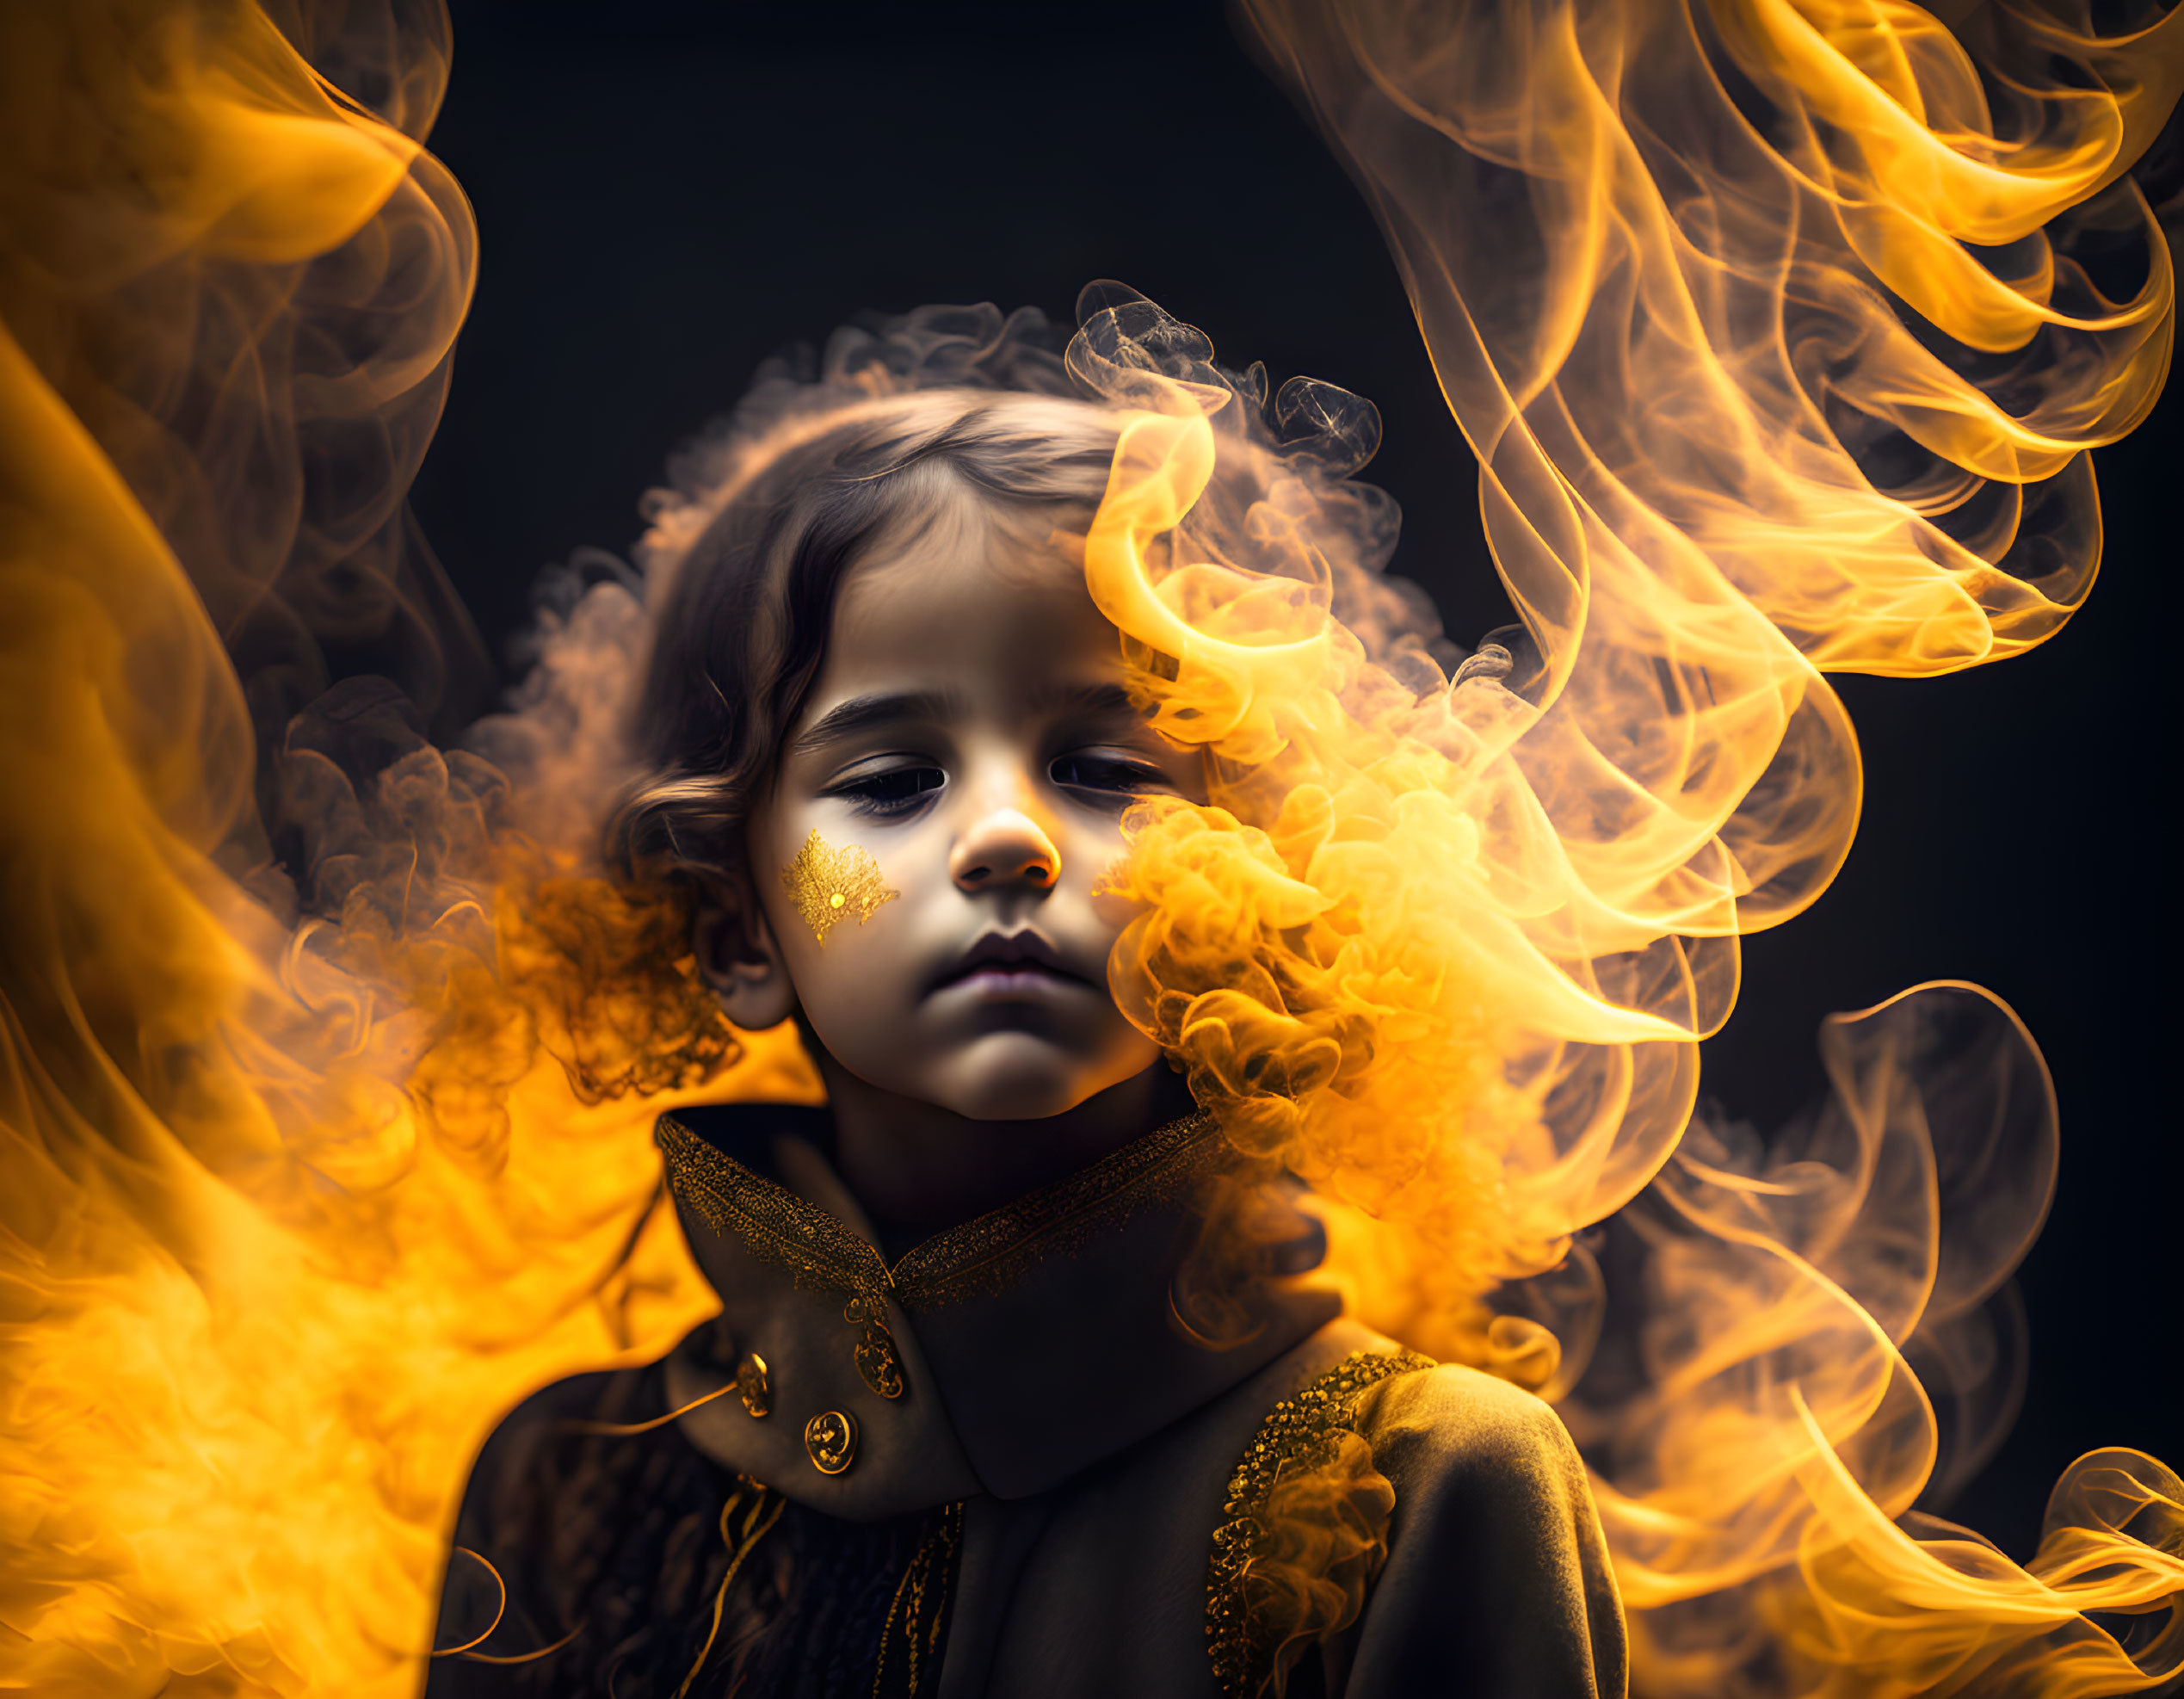 Child in Dark Embellished Outfit Amid Orange Flames